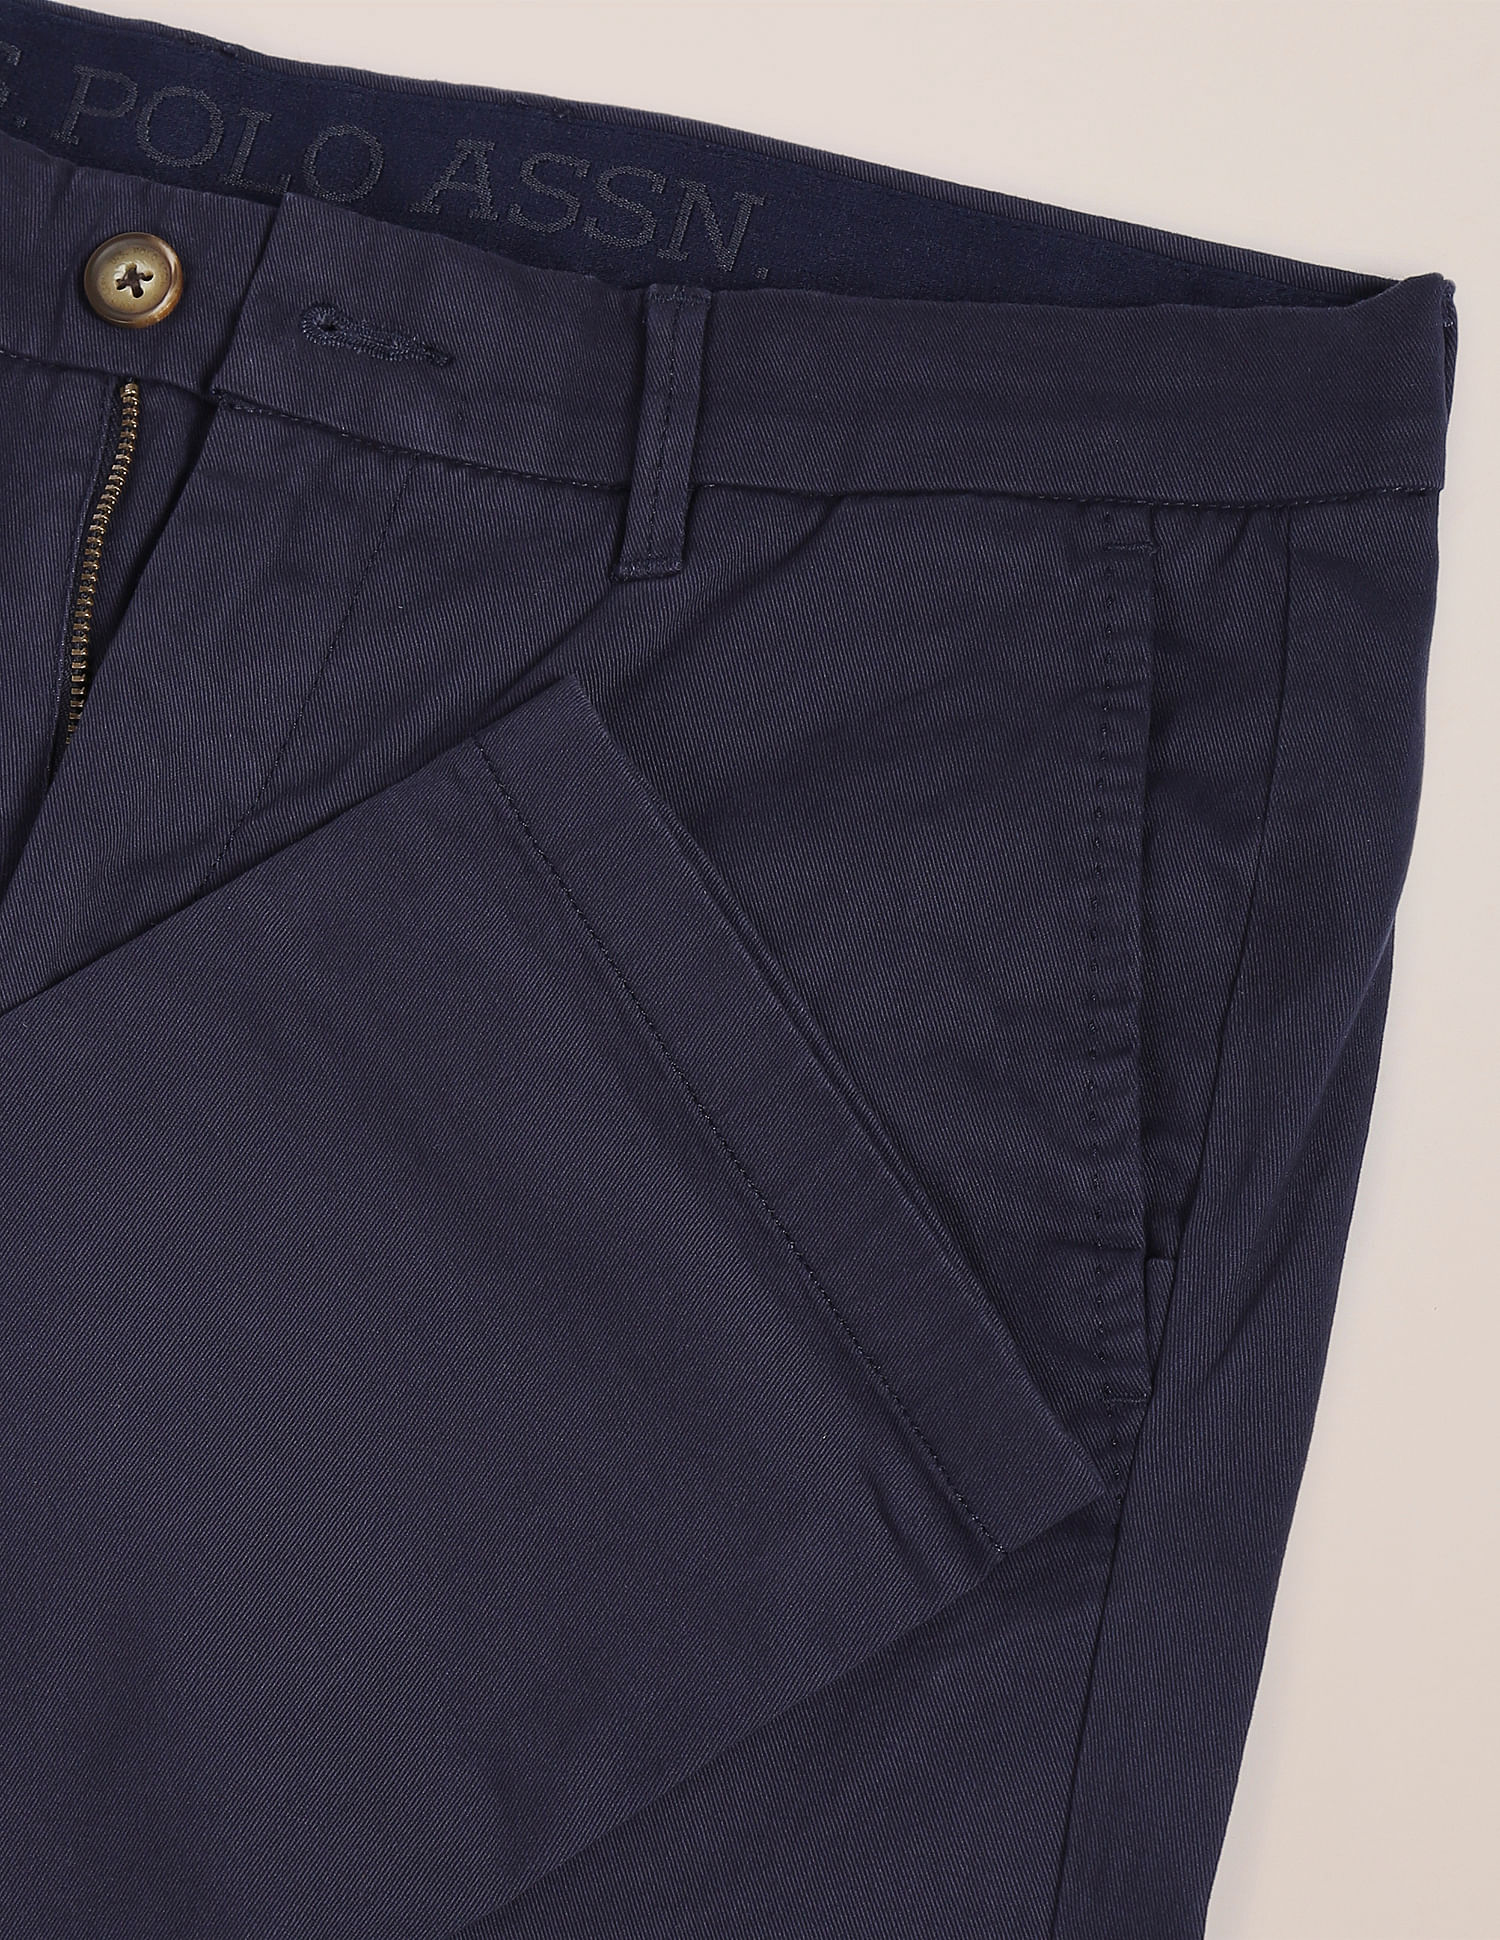 Mens Navy Blue Trousers  T The Brand  Tea  Tailoring